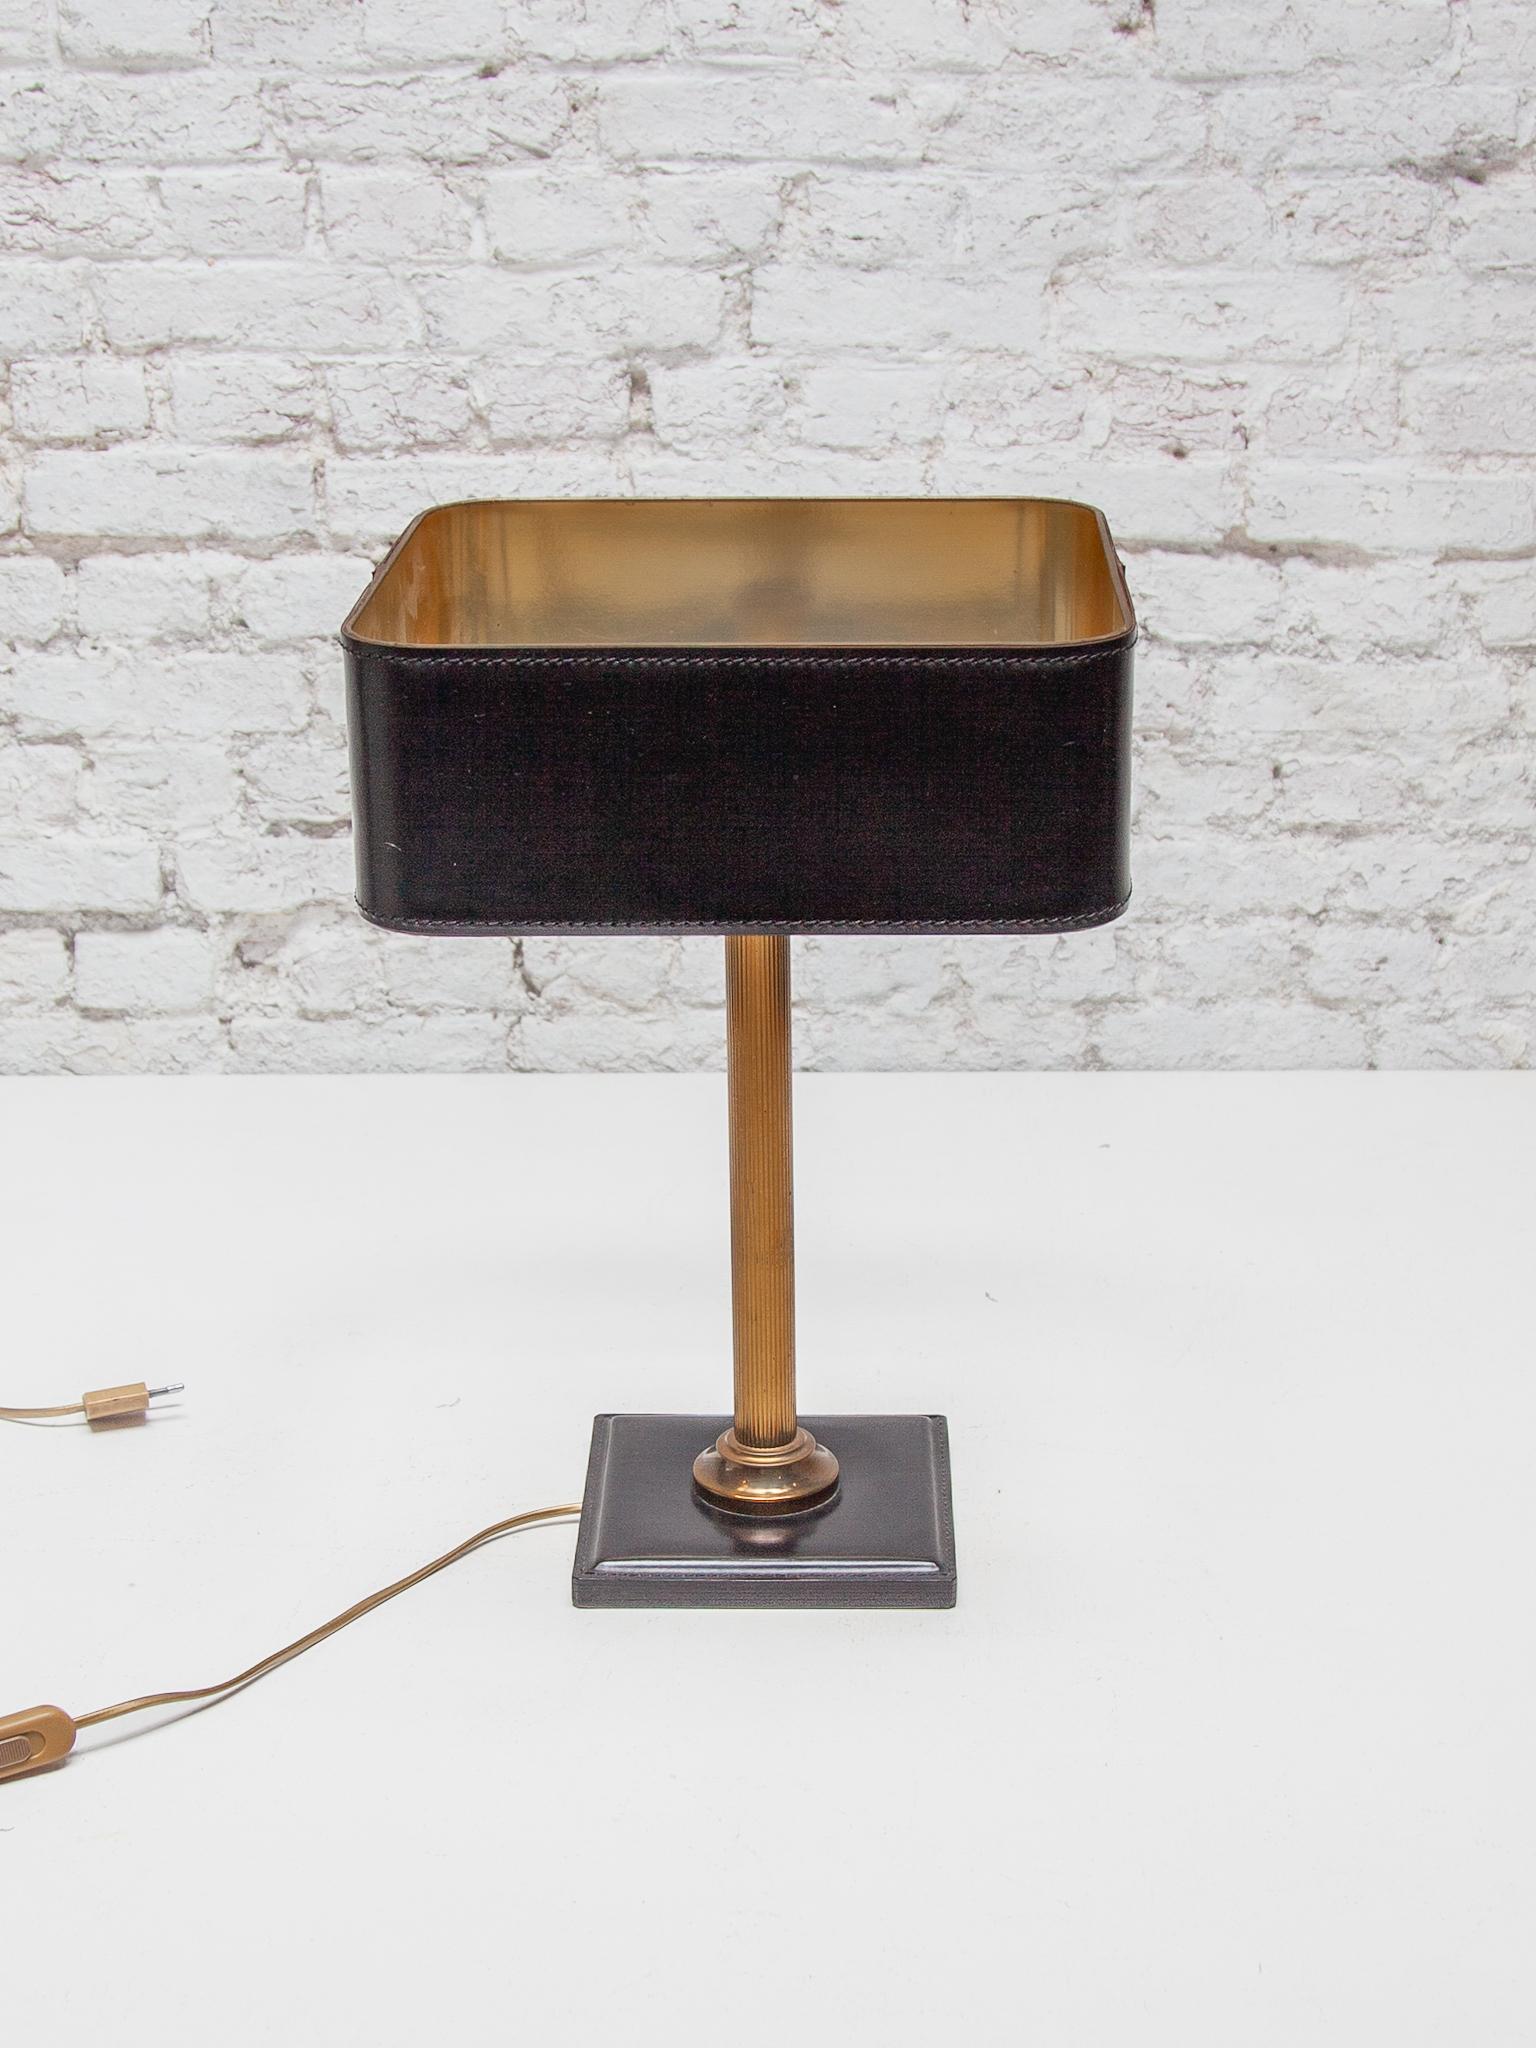 This very nice desk lamp is made of black leather and brass. A very elegant model lamp for your desk or sideboard in your living room or office in the style of the French designer Jacques Adnet. Circa 1970.
